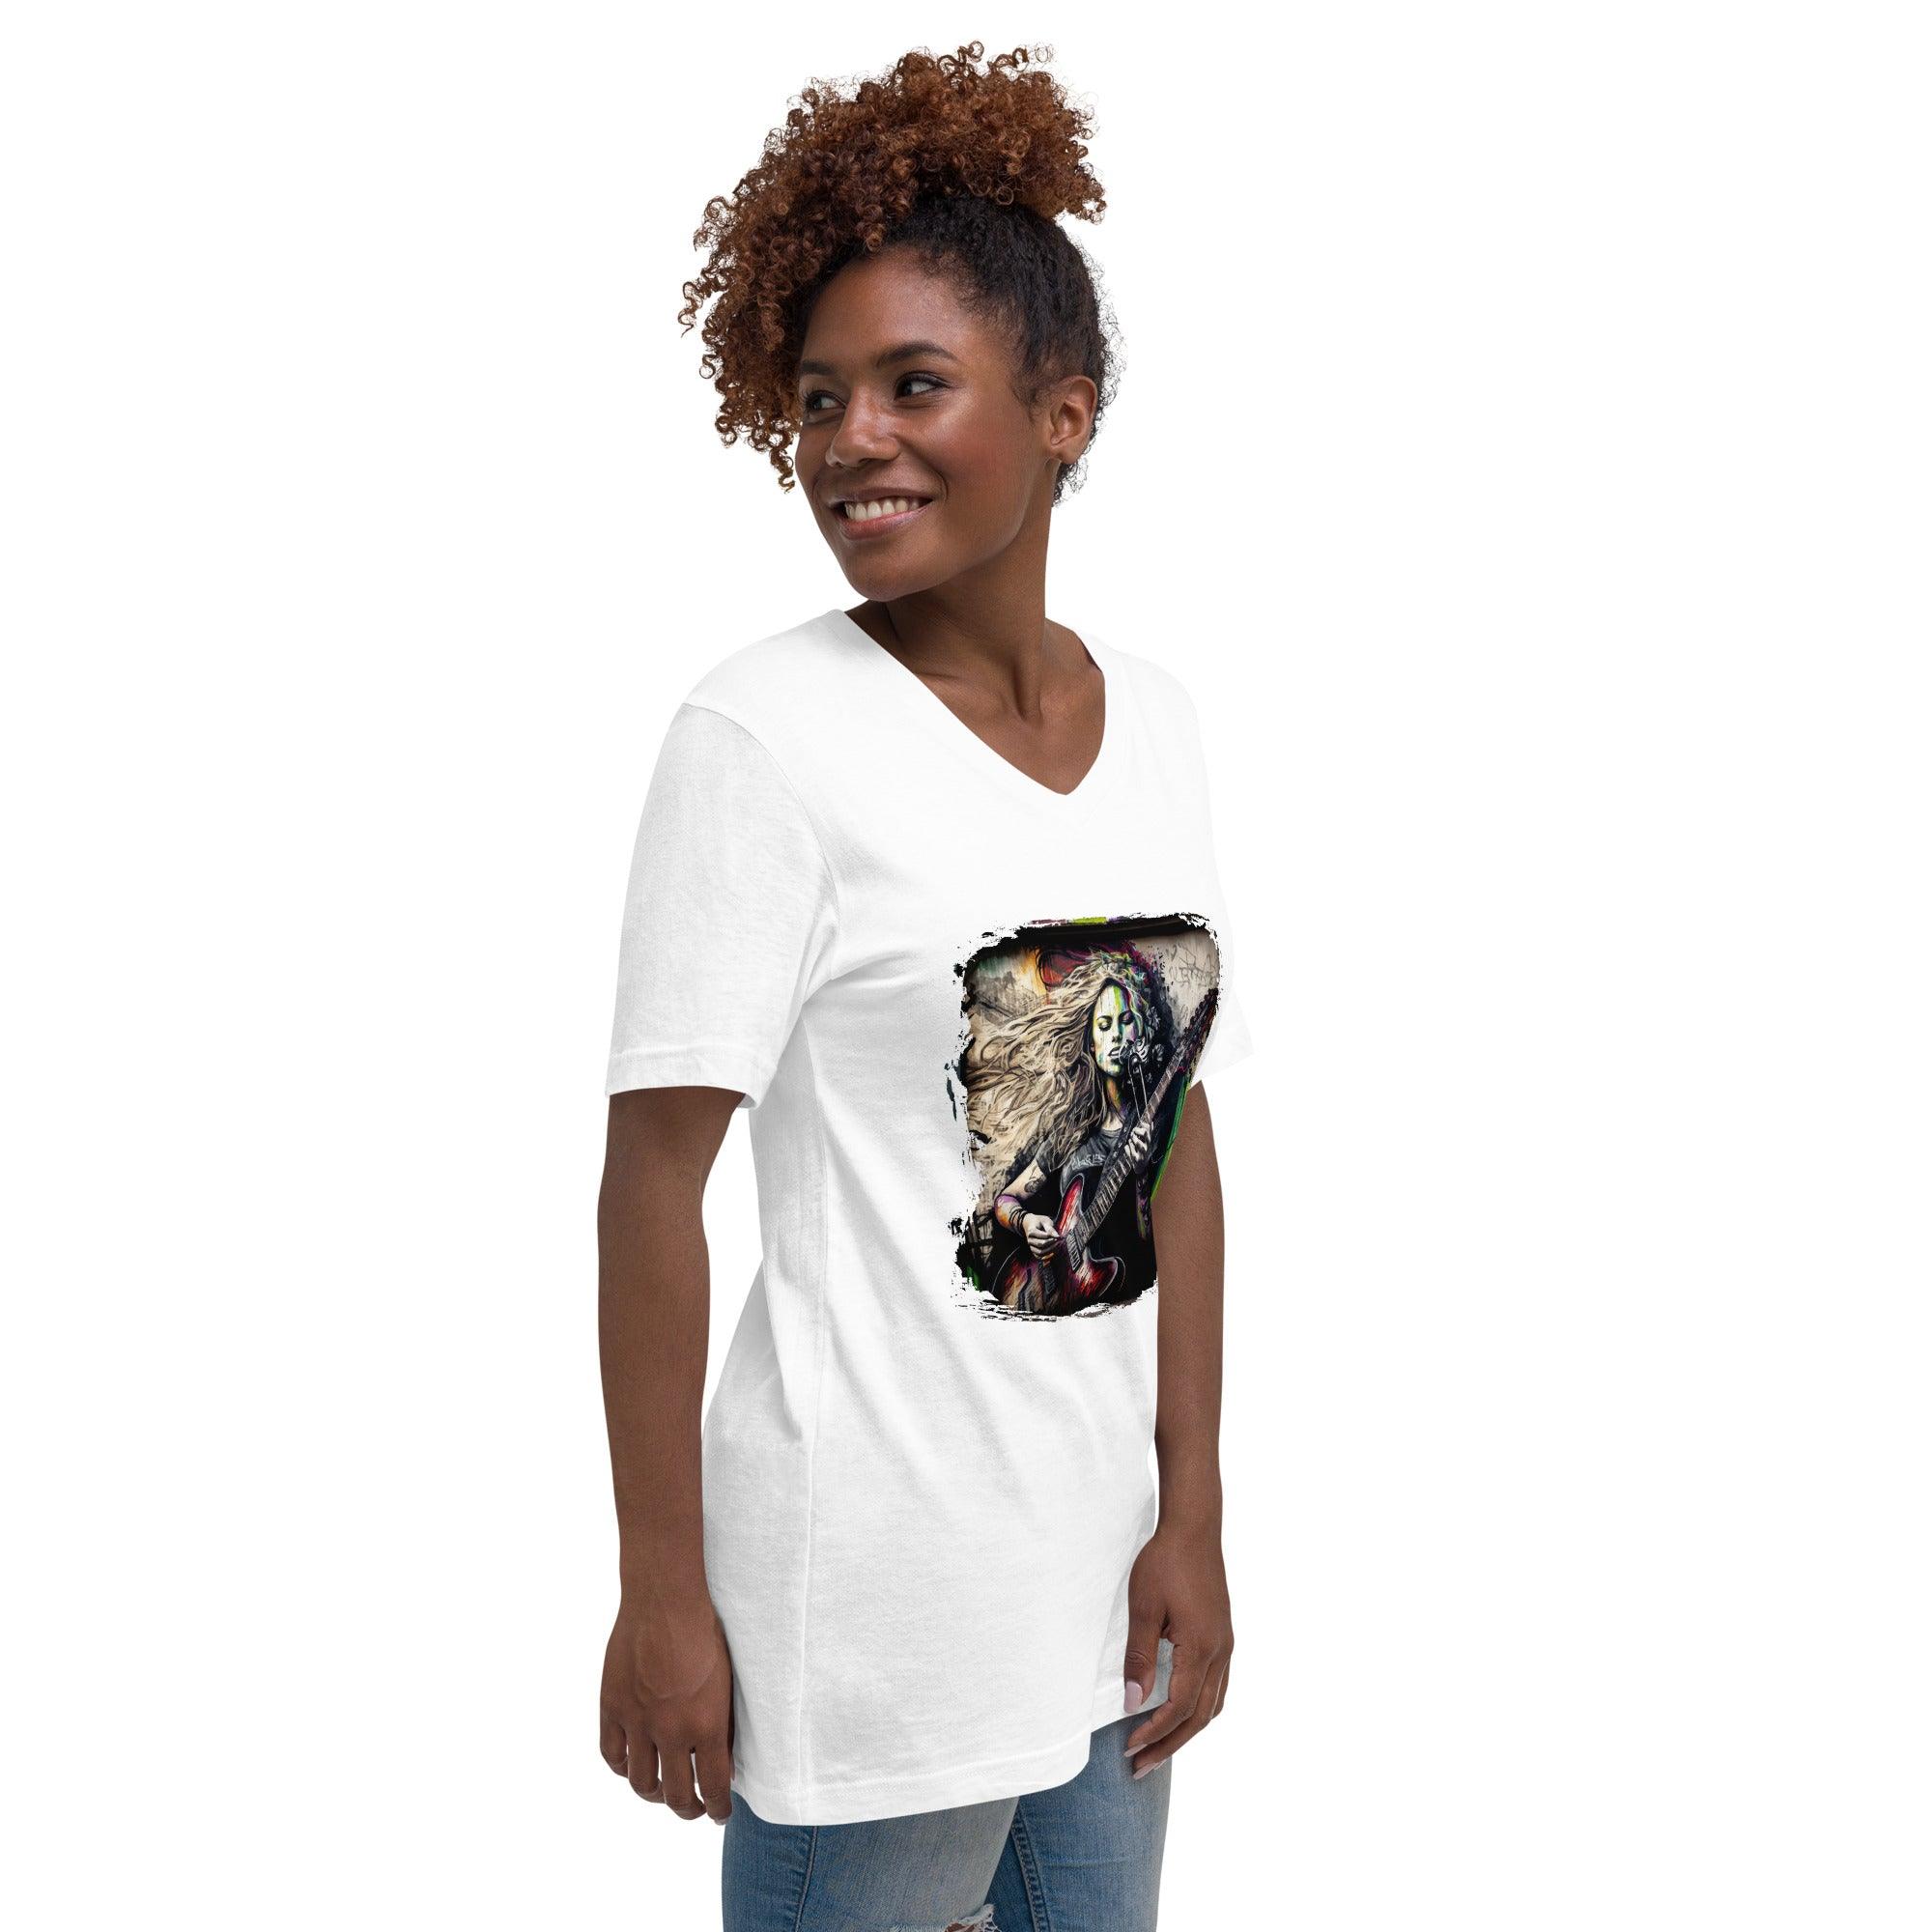 Her Music Soothes Souls Unisex Short Sleeve V-Neck T-Shirt - Beyond T-shirts